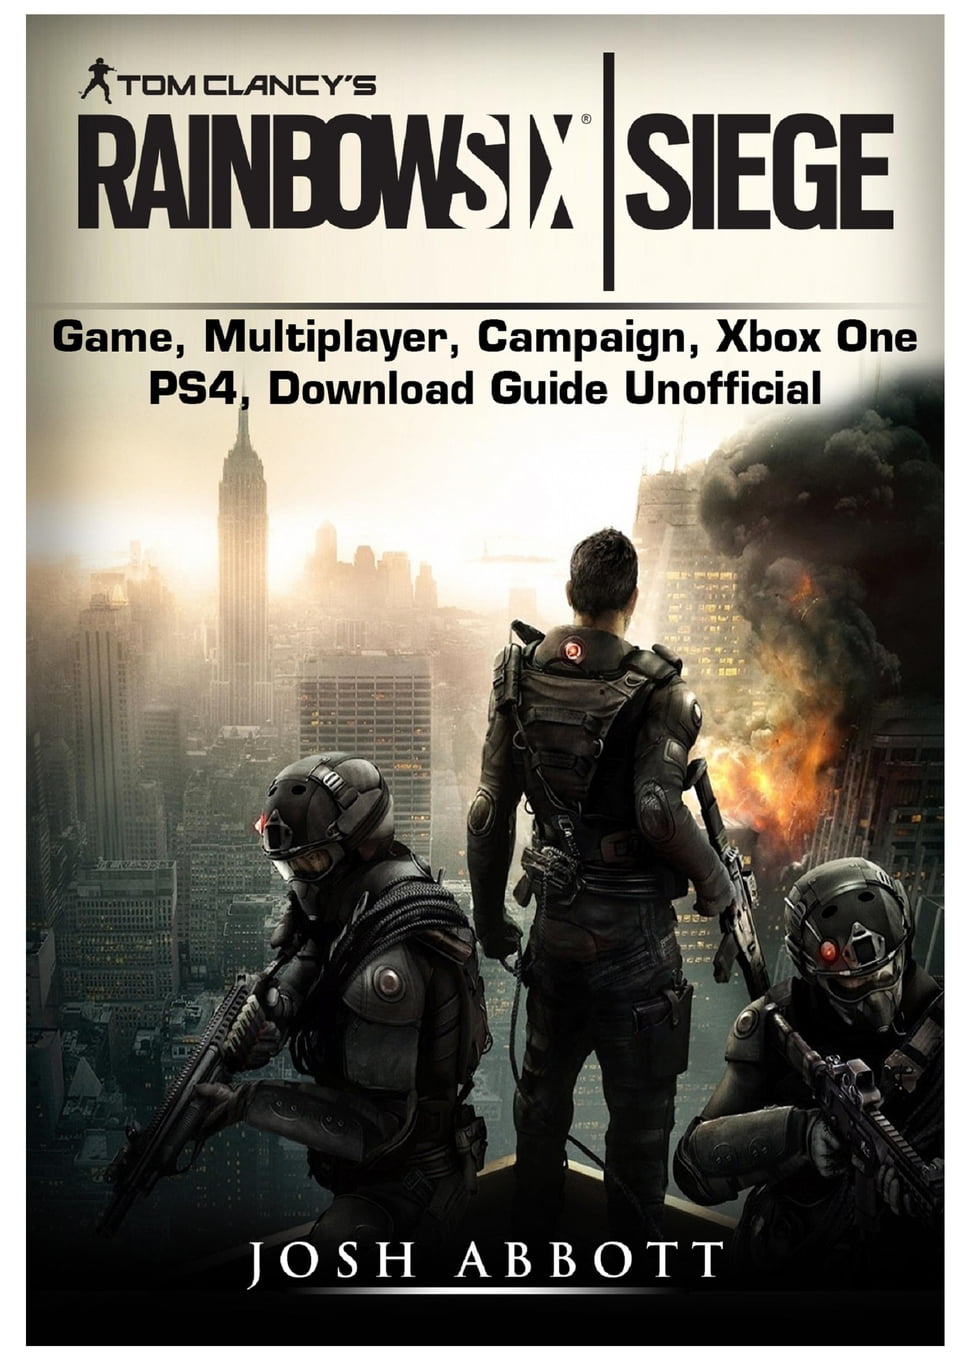 Balehval Vie Muskuløs Tom Clancys Rainbow 6 Siege Game, Multiplayer, Campaign, Xbox One, PS4,  Download Guide Unofficial - Walmart.com